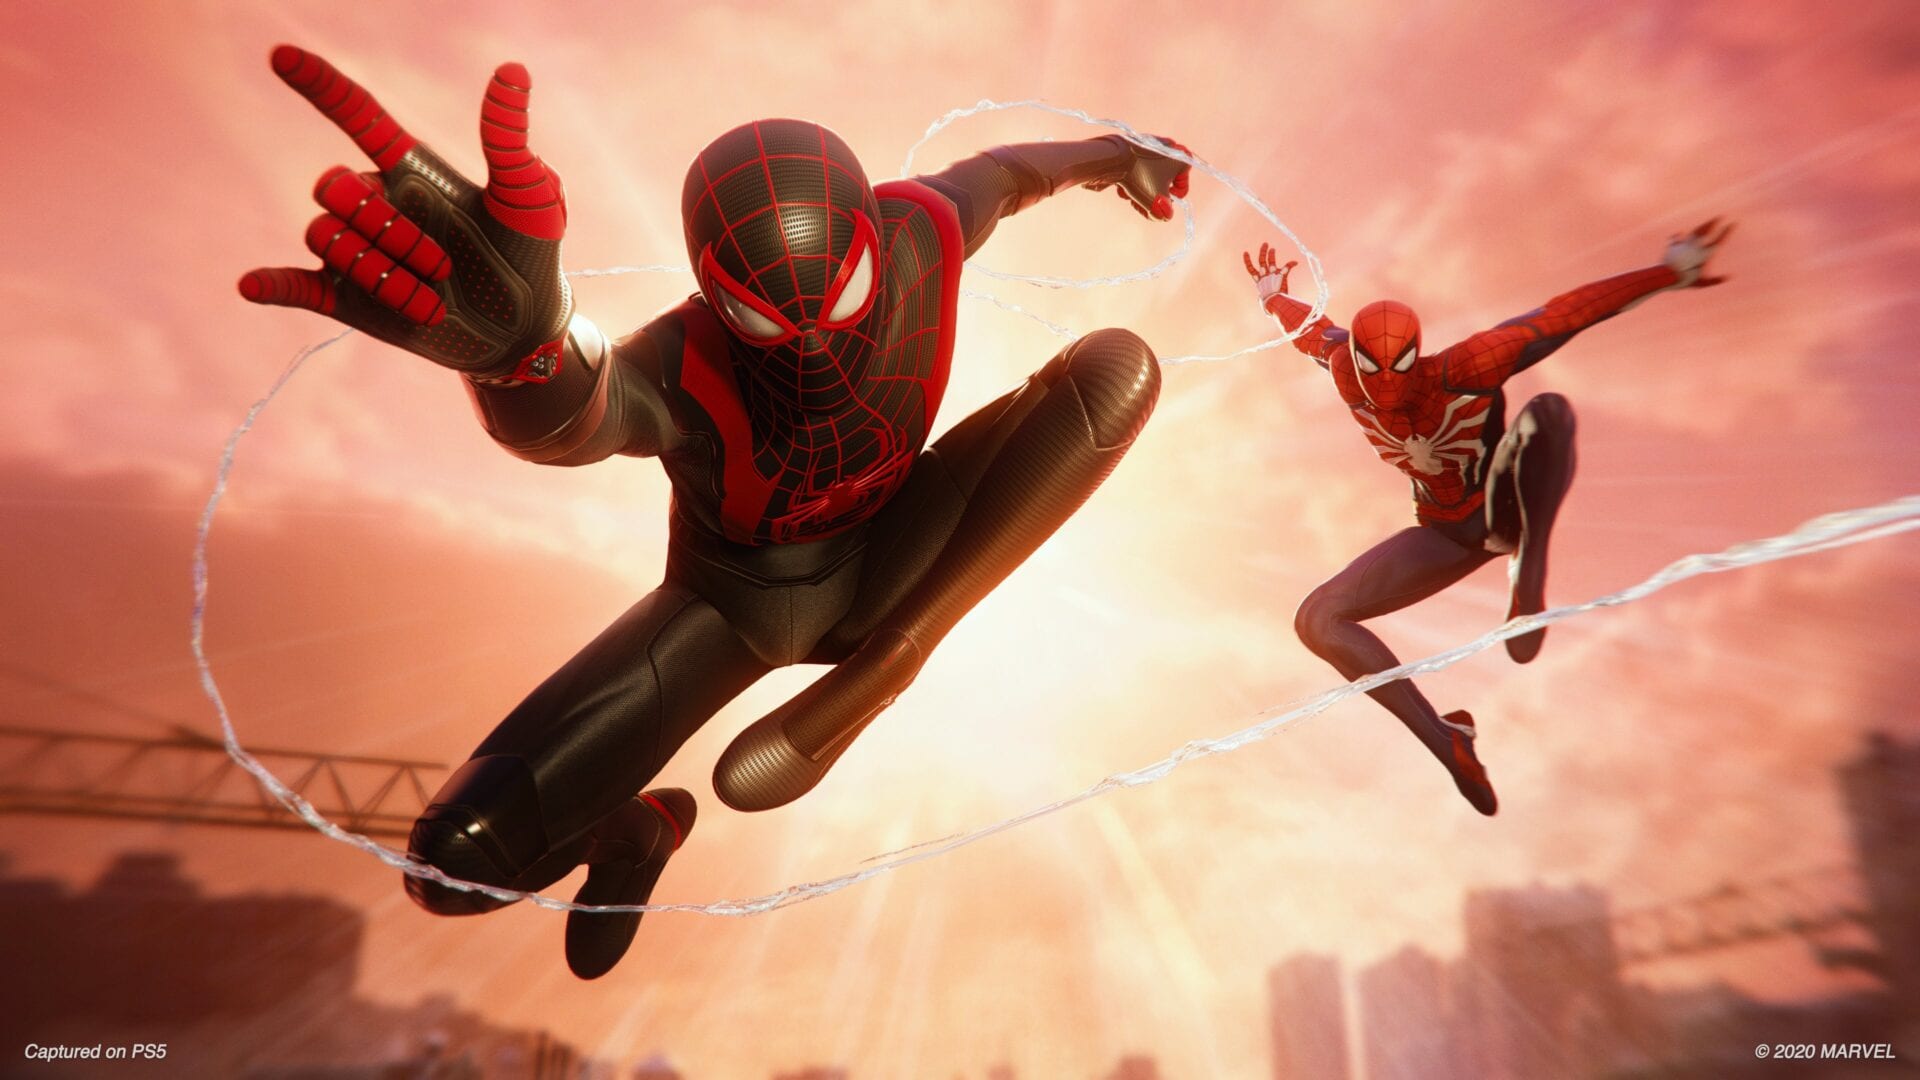 The Best Thwipin' Miles Morales Wallpaper Around